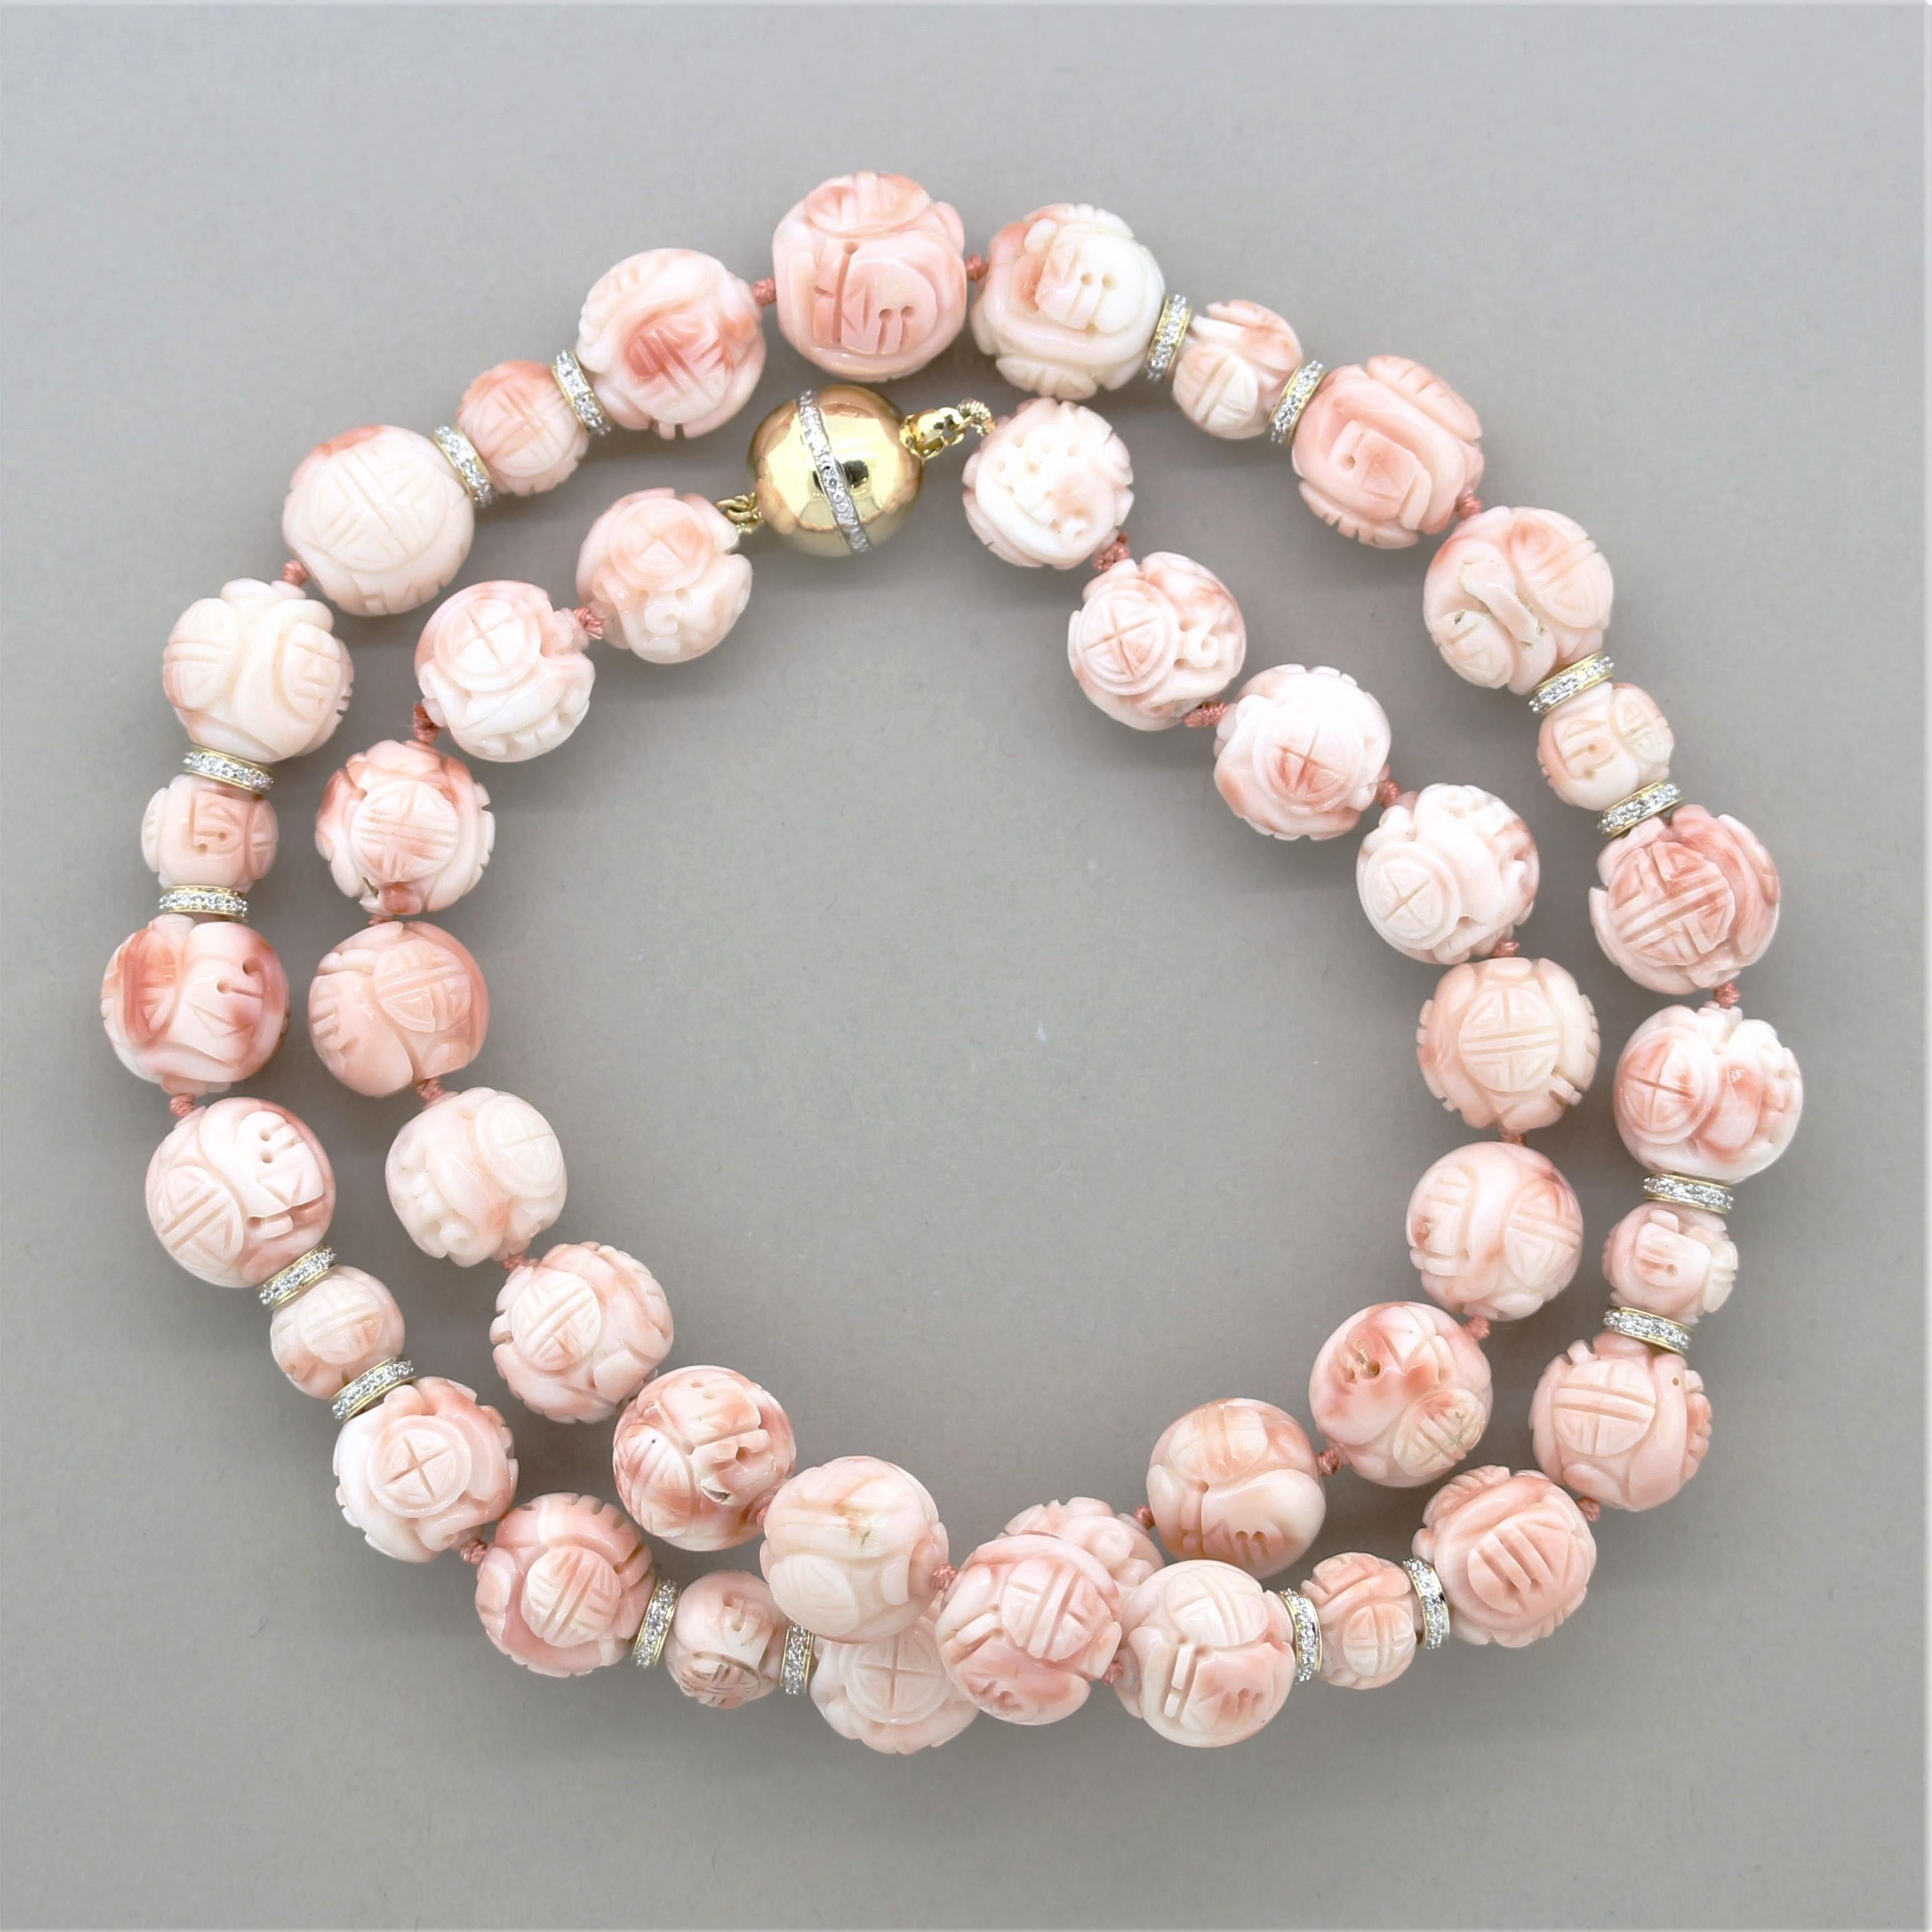 A unique vintage necklace featuring 43 pieces of natural carved coral beads with intricate designs. Accenting the coral is 1 carat of round brilliant-cut diamonds which are set in gold spacers between the coral beads in the front as well as set on